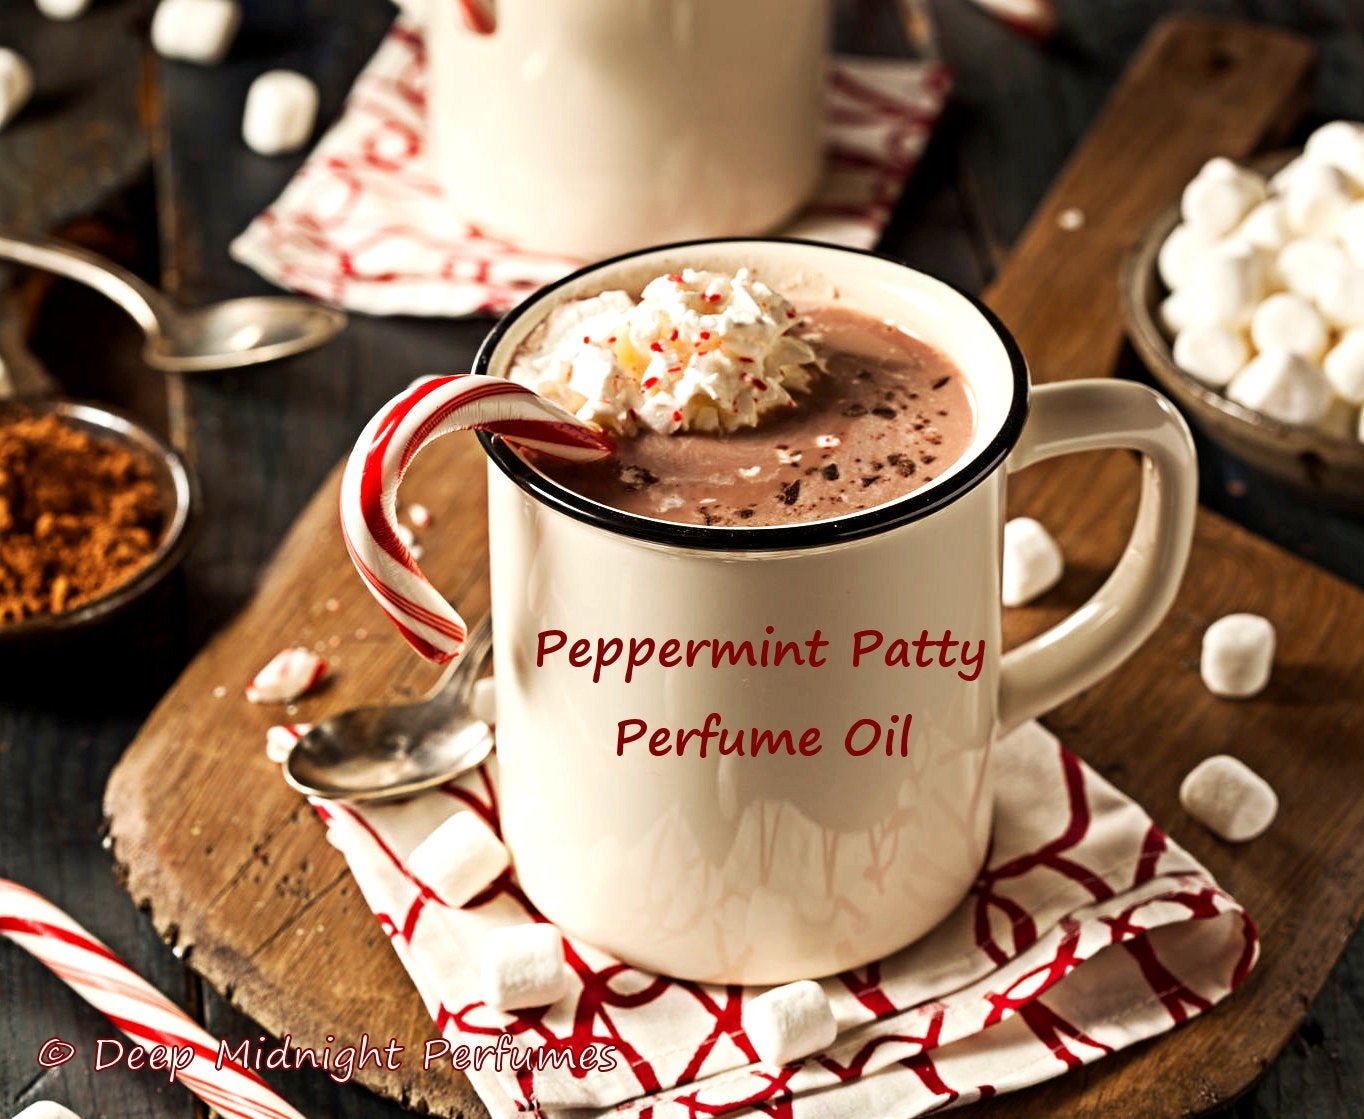 PEPPERMINT PATTY Perfume Oil - Chocolate Cocoa, Peppermint, Sugar Crystals, Spruce, Ozone, Berries - Christmas Perfume - Holiday Fragrance